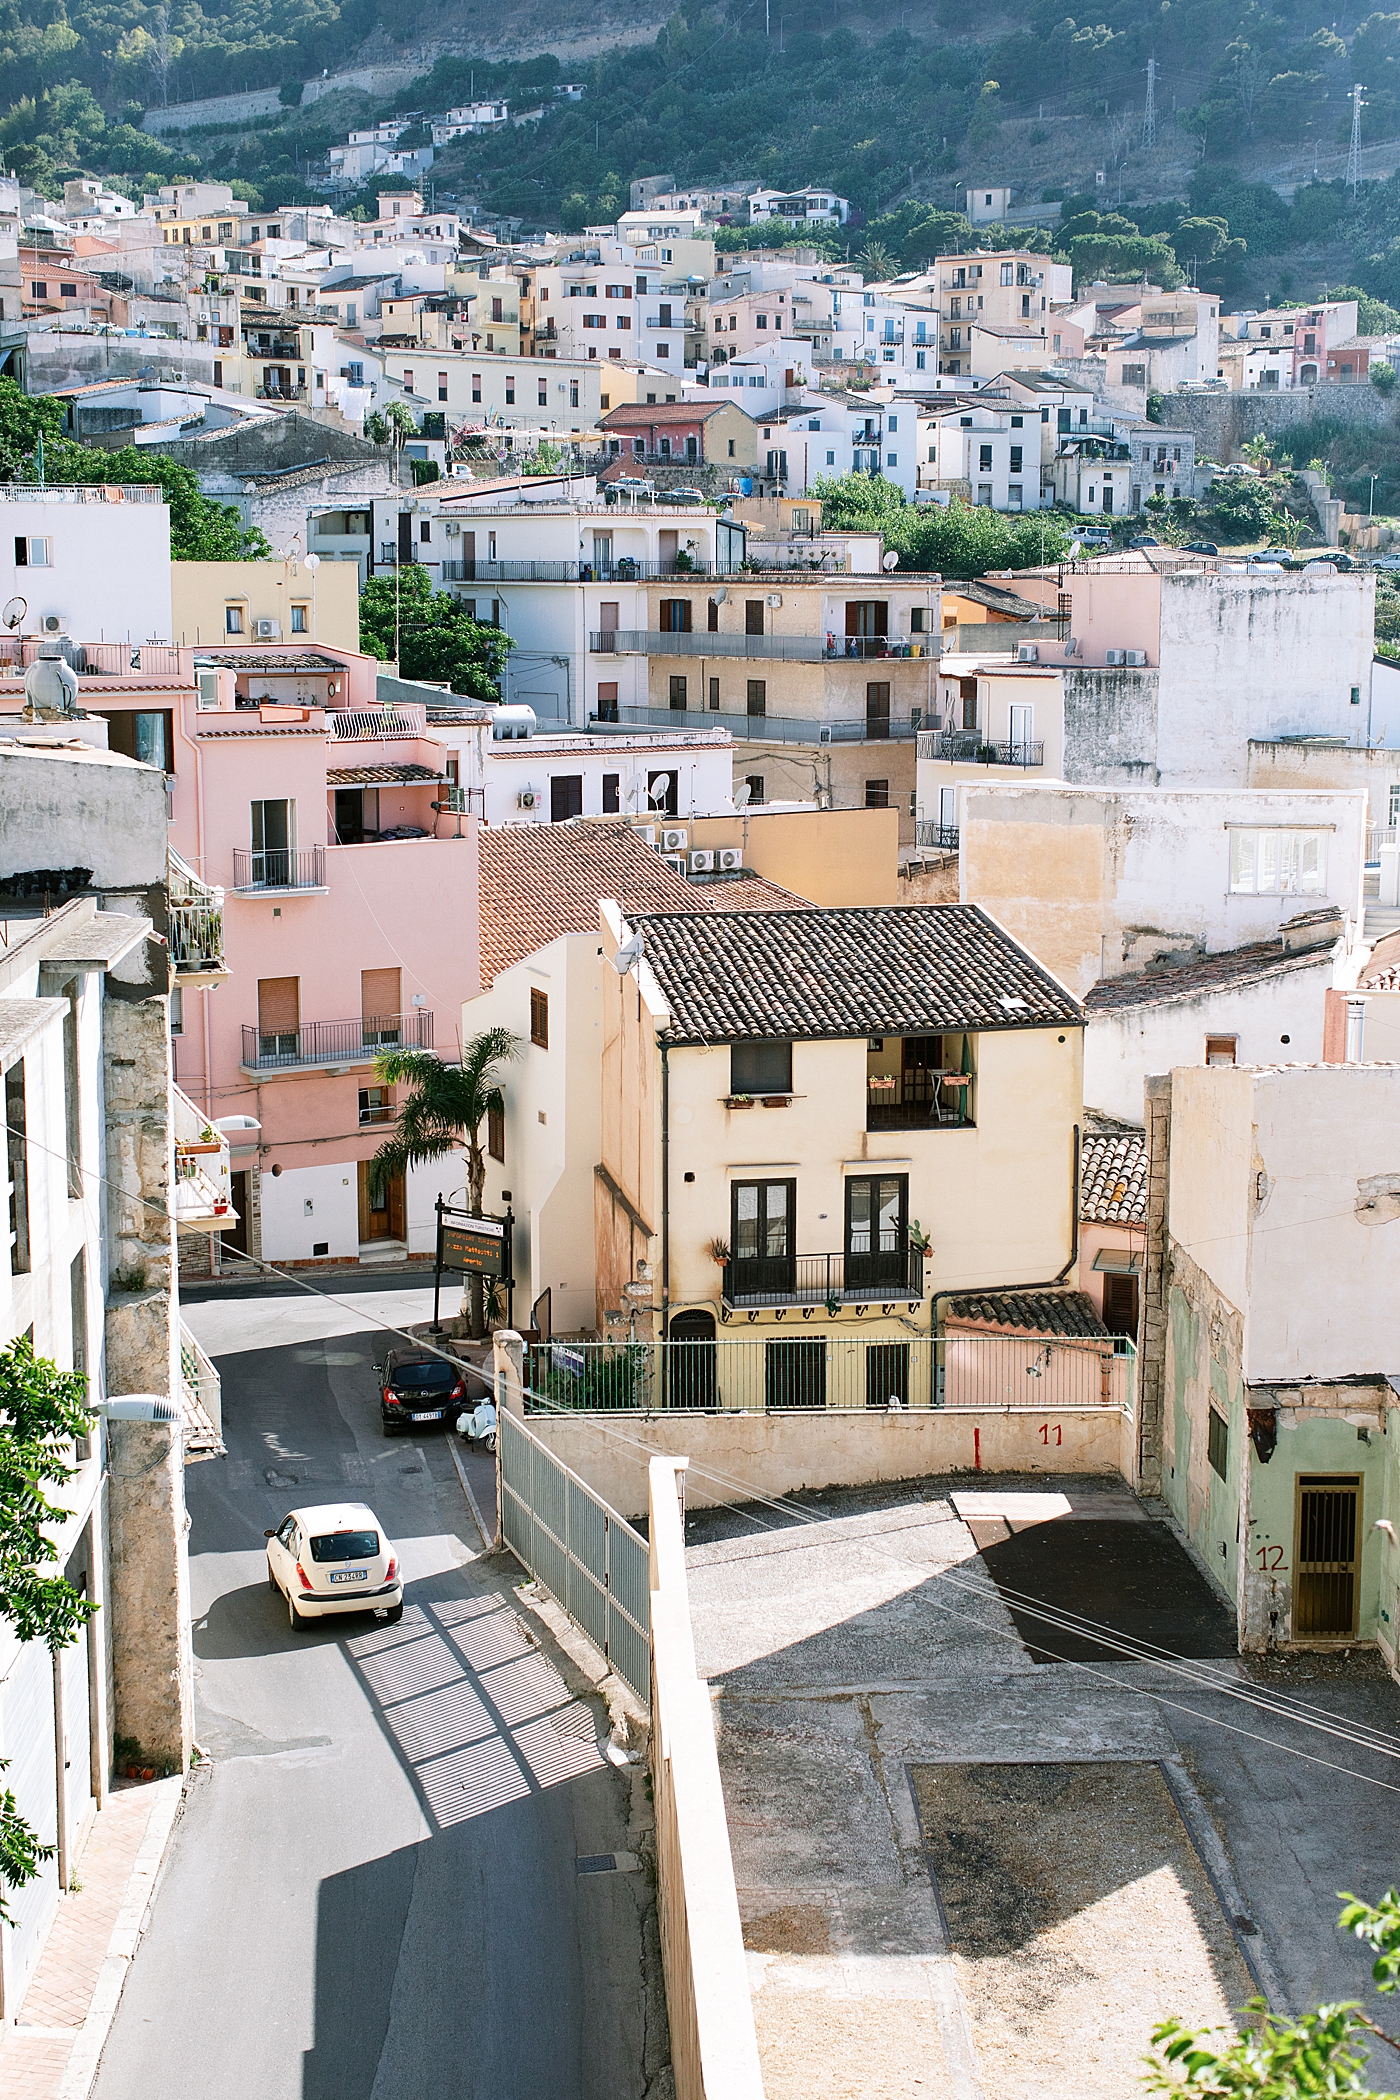 Pastel buildings with an italian car | Photo by Josie Derrick